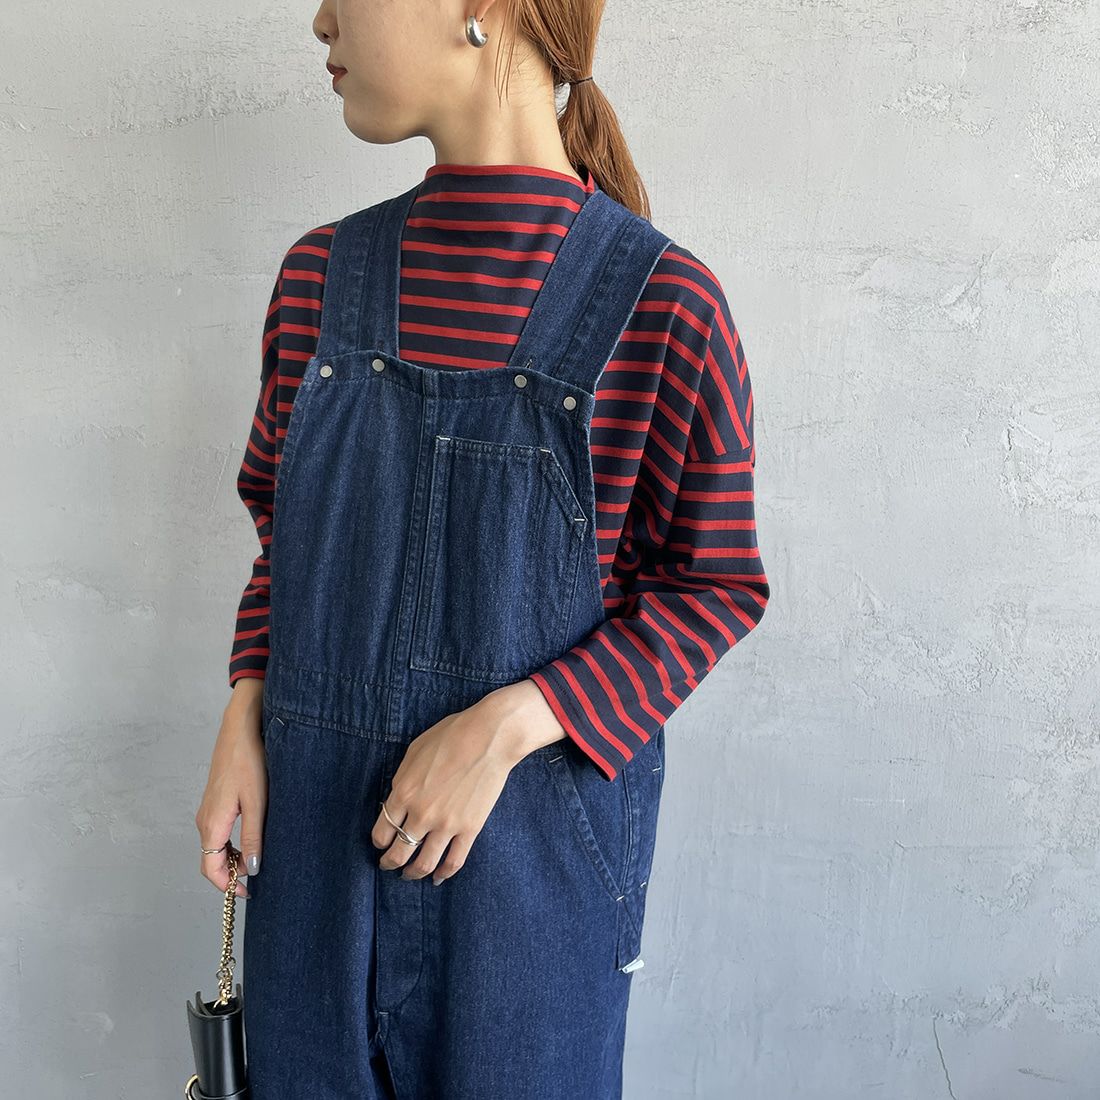 NAVY/RED&&モデル身長：156cm　着用サイズ：1&&